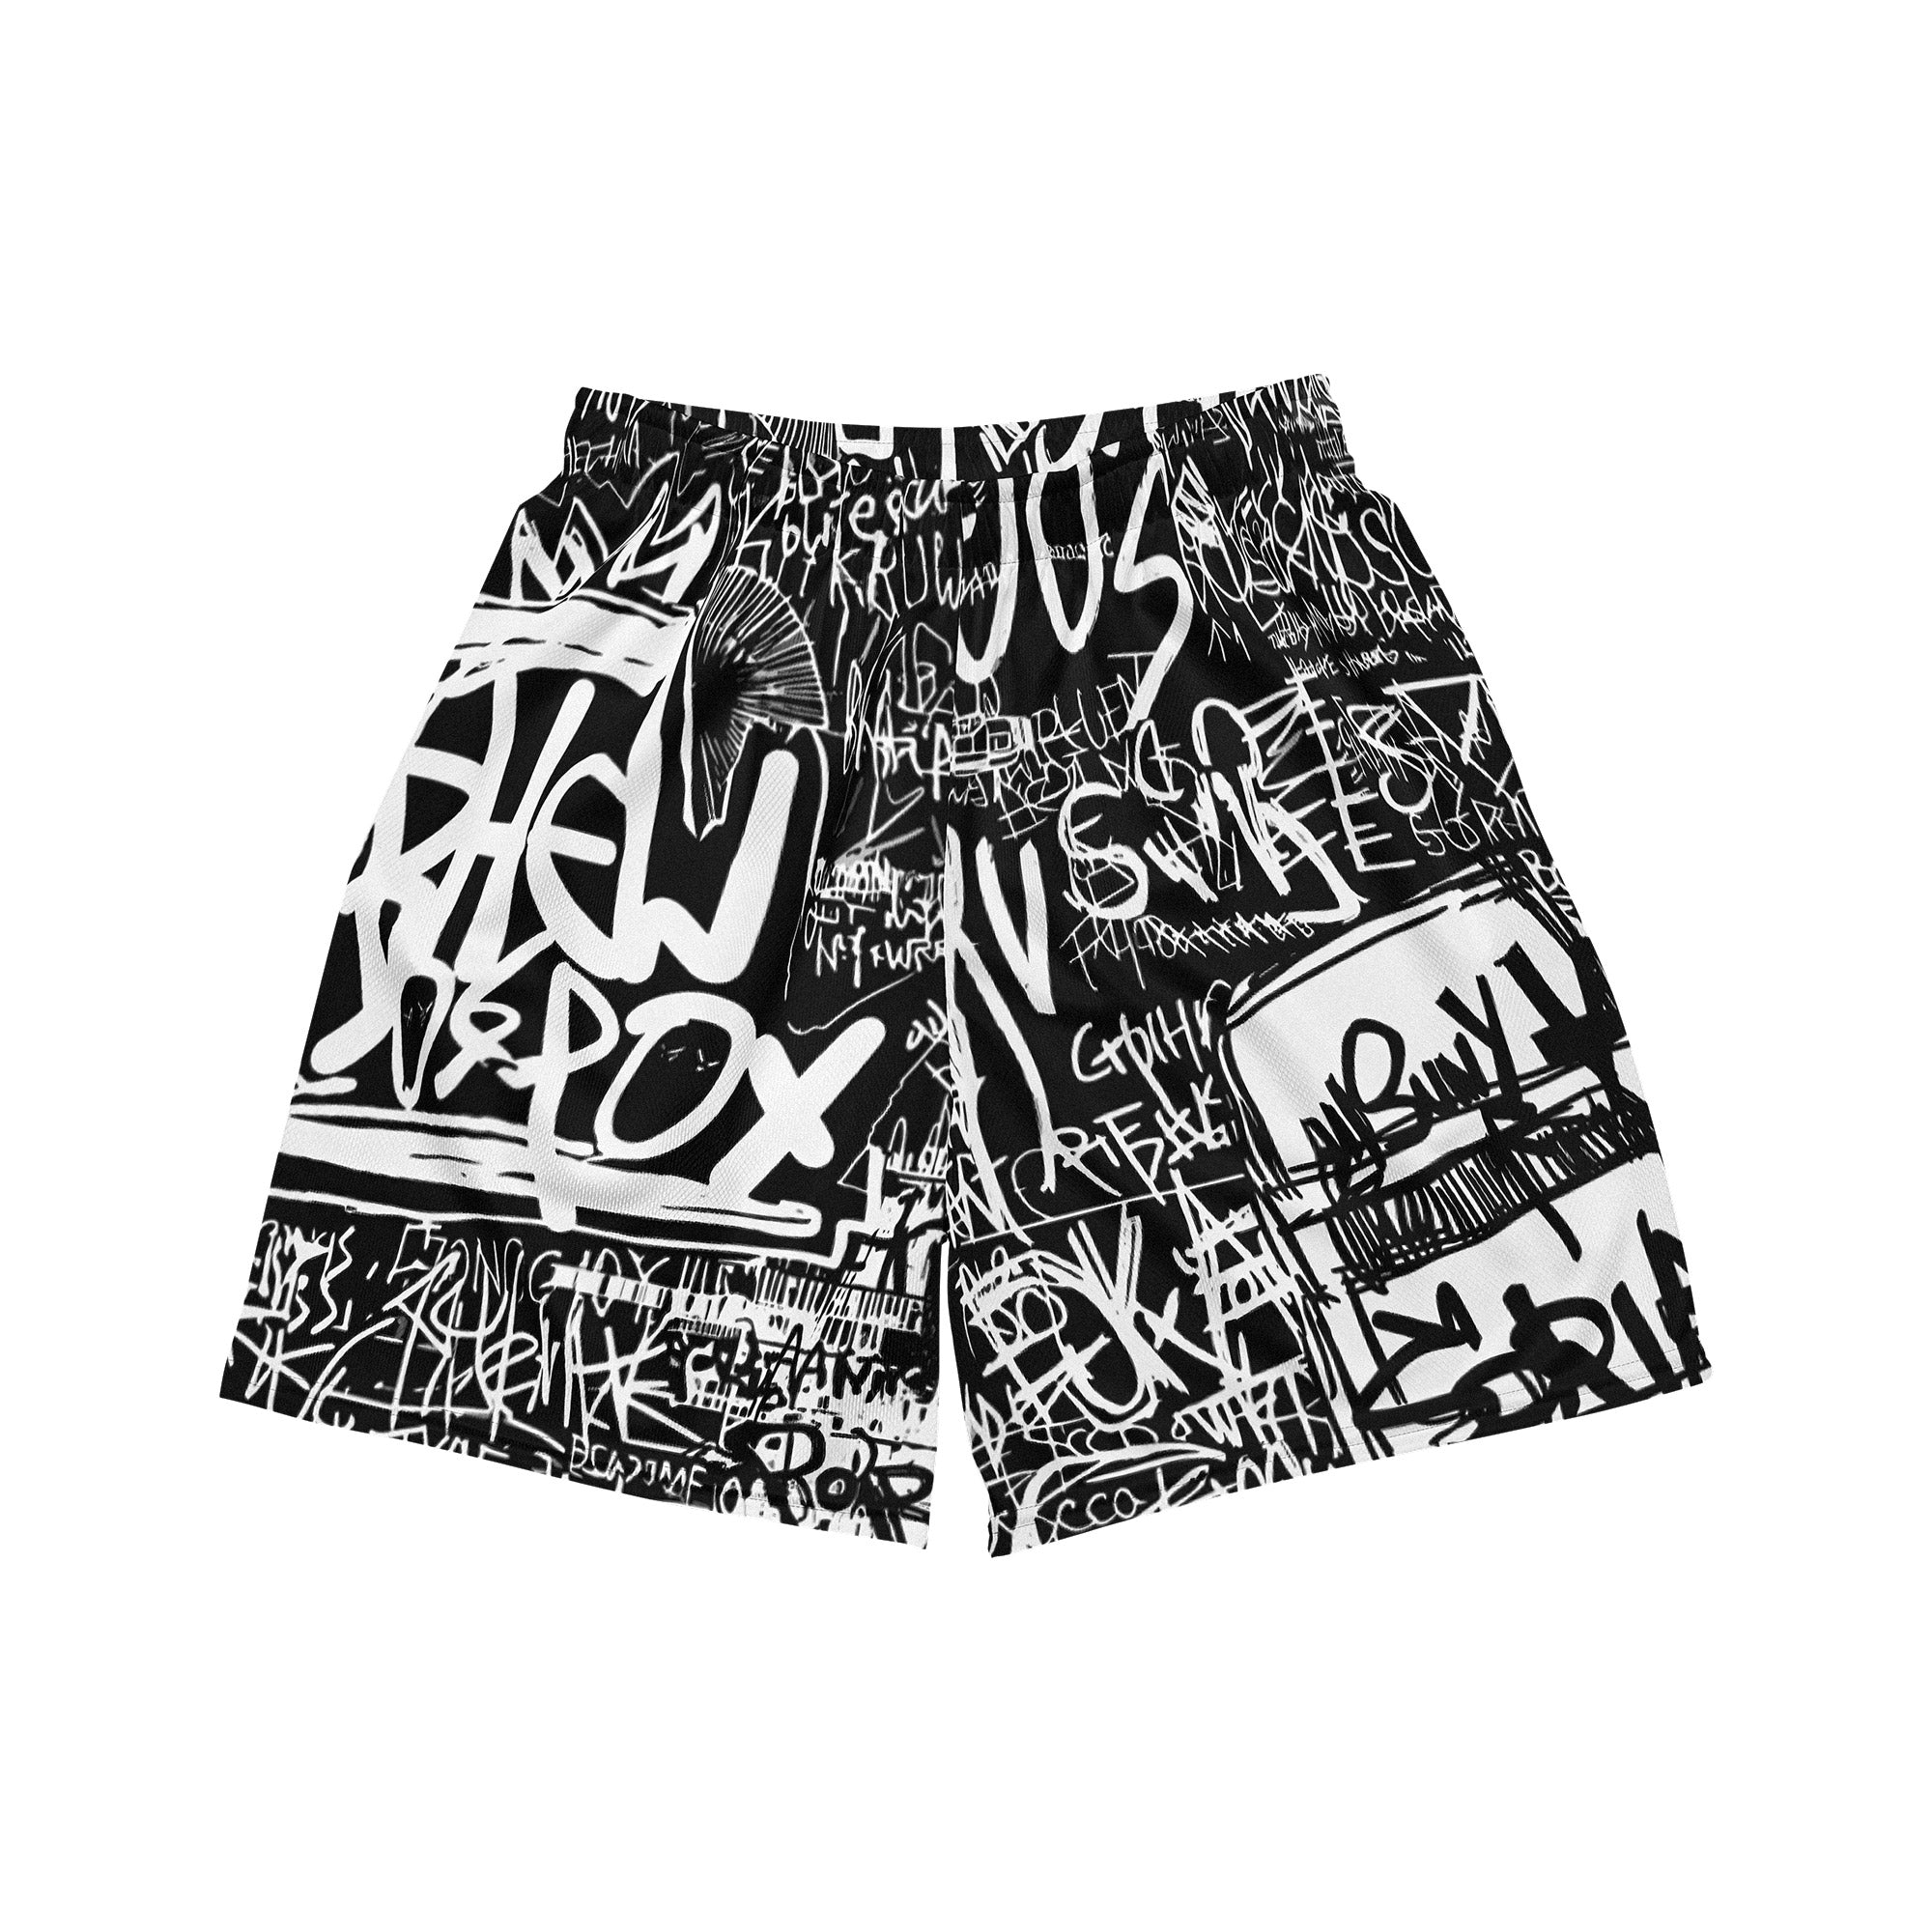 Unisex mesh shorts made from recycled materials embody the perfect blend of functionality and fashion. Designed to accommodate both intense athletic activities and trendy streetwear.